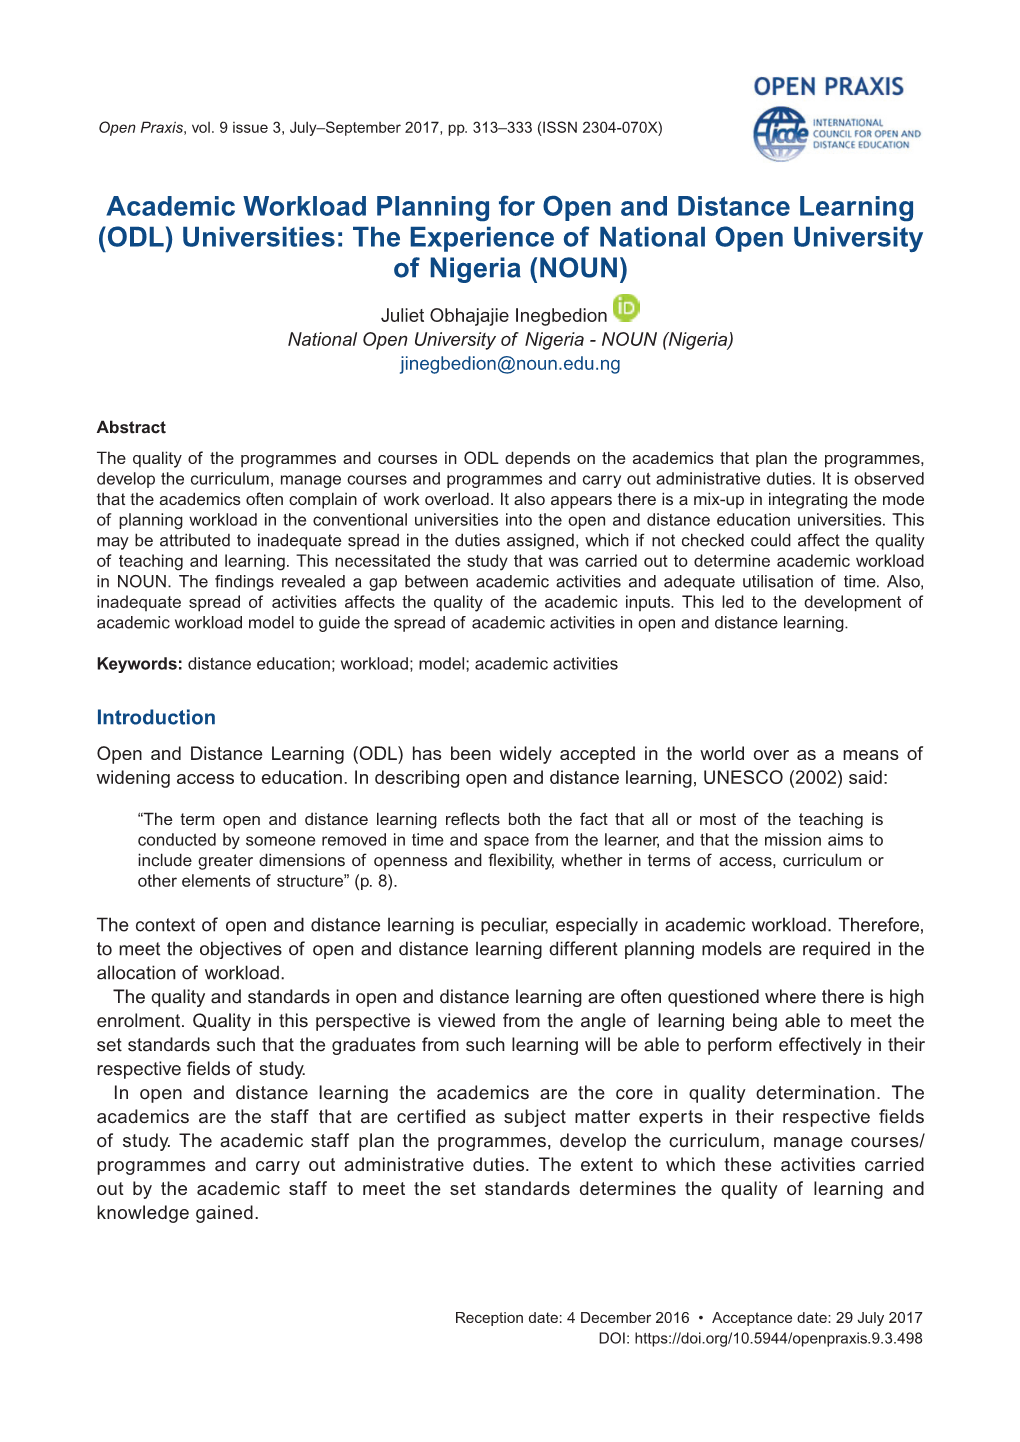 Academic Workload Planning for Open and Distance Learning (ODL) Universities: the Experience of National Open University of Nigeria (NOUN)